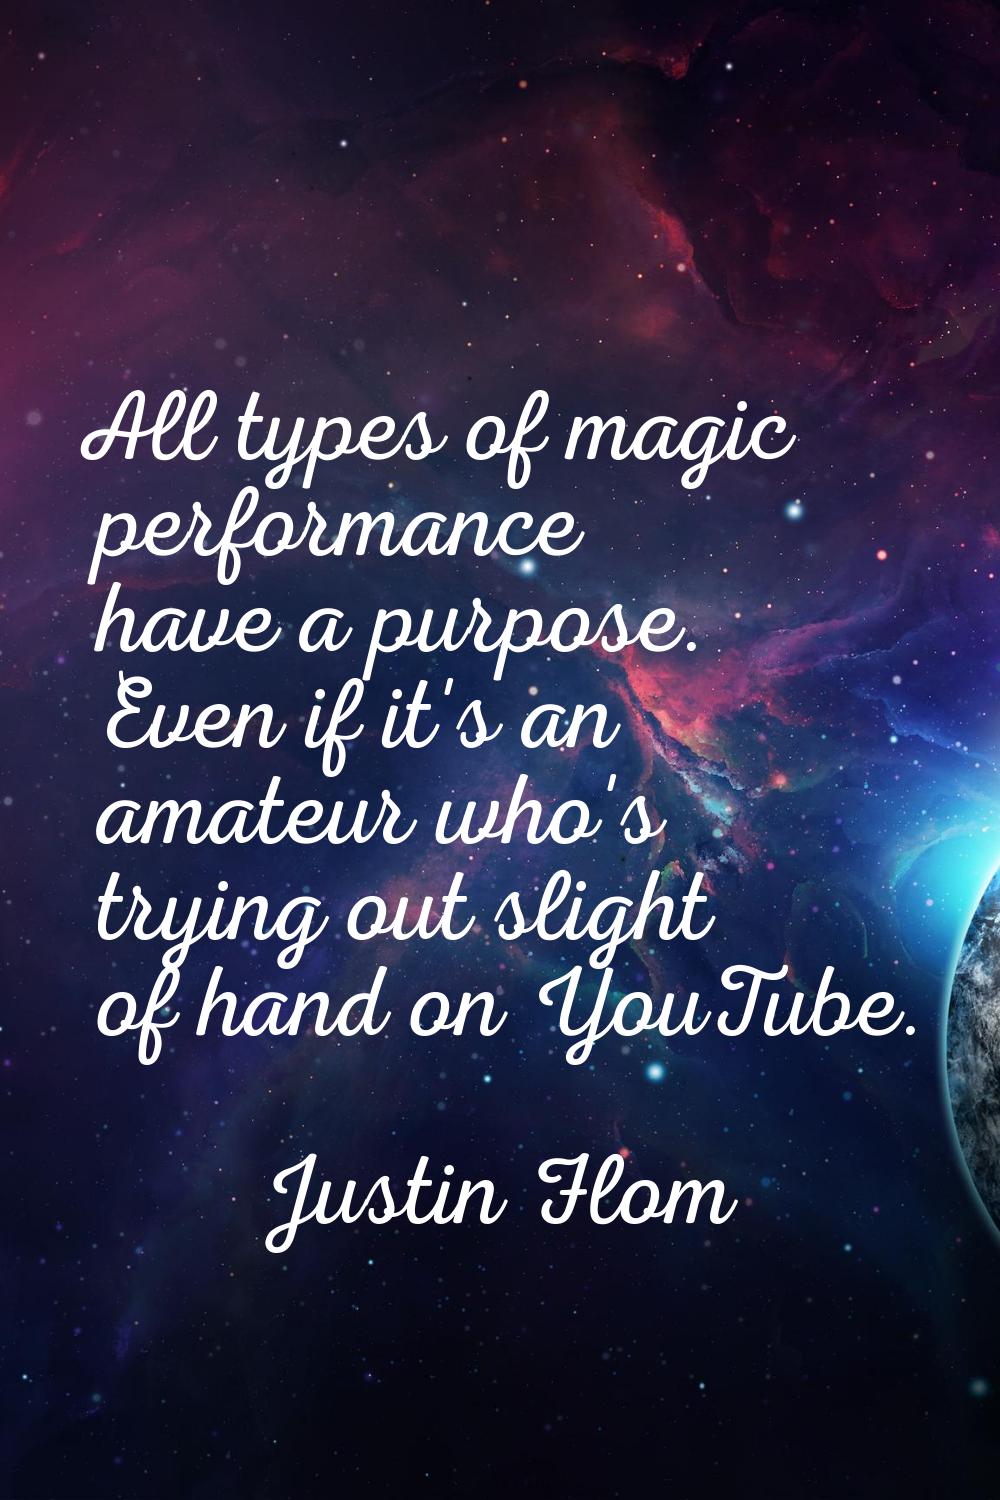 All types of magic performance have a purpose. Even if it's an amateur who's trying out slight of h